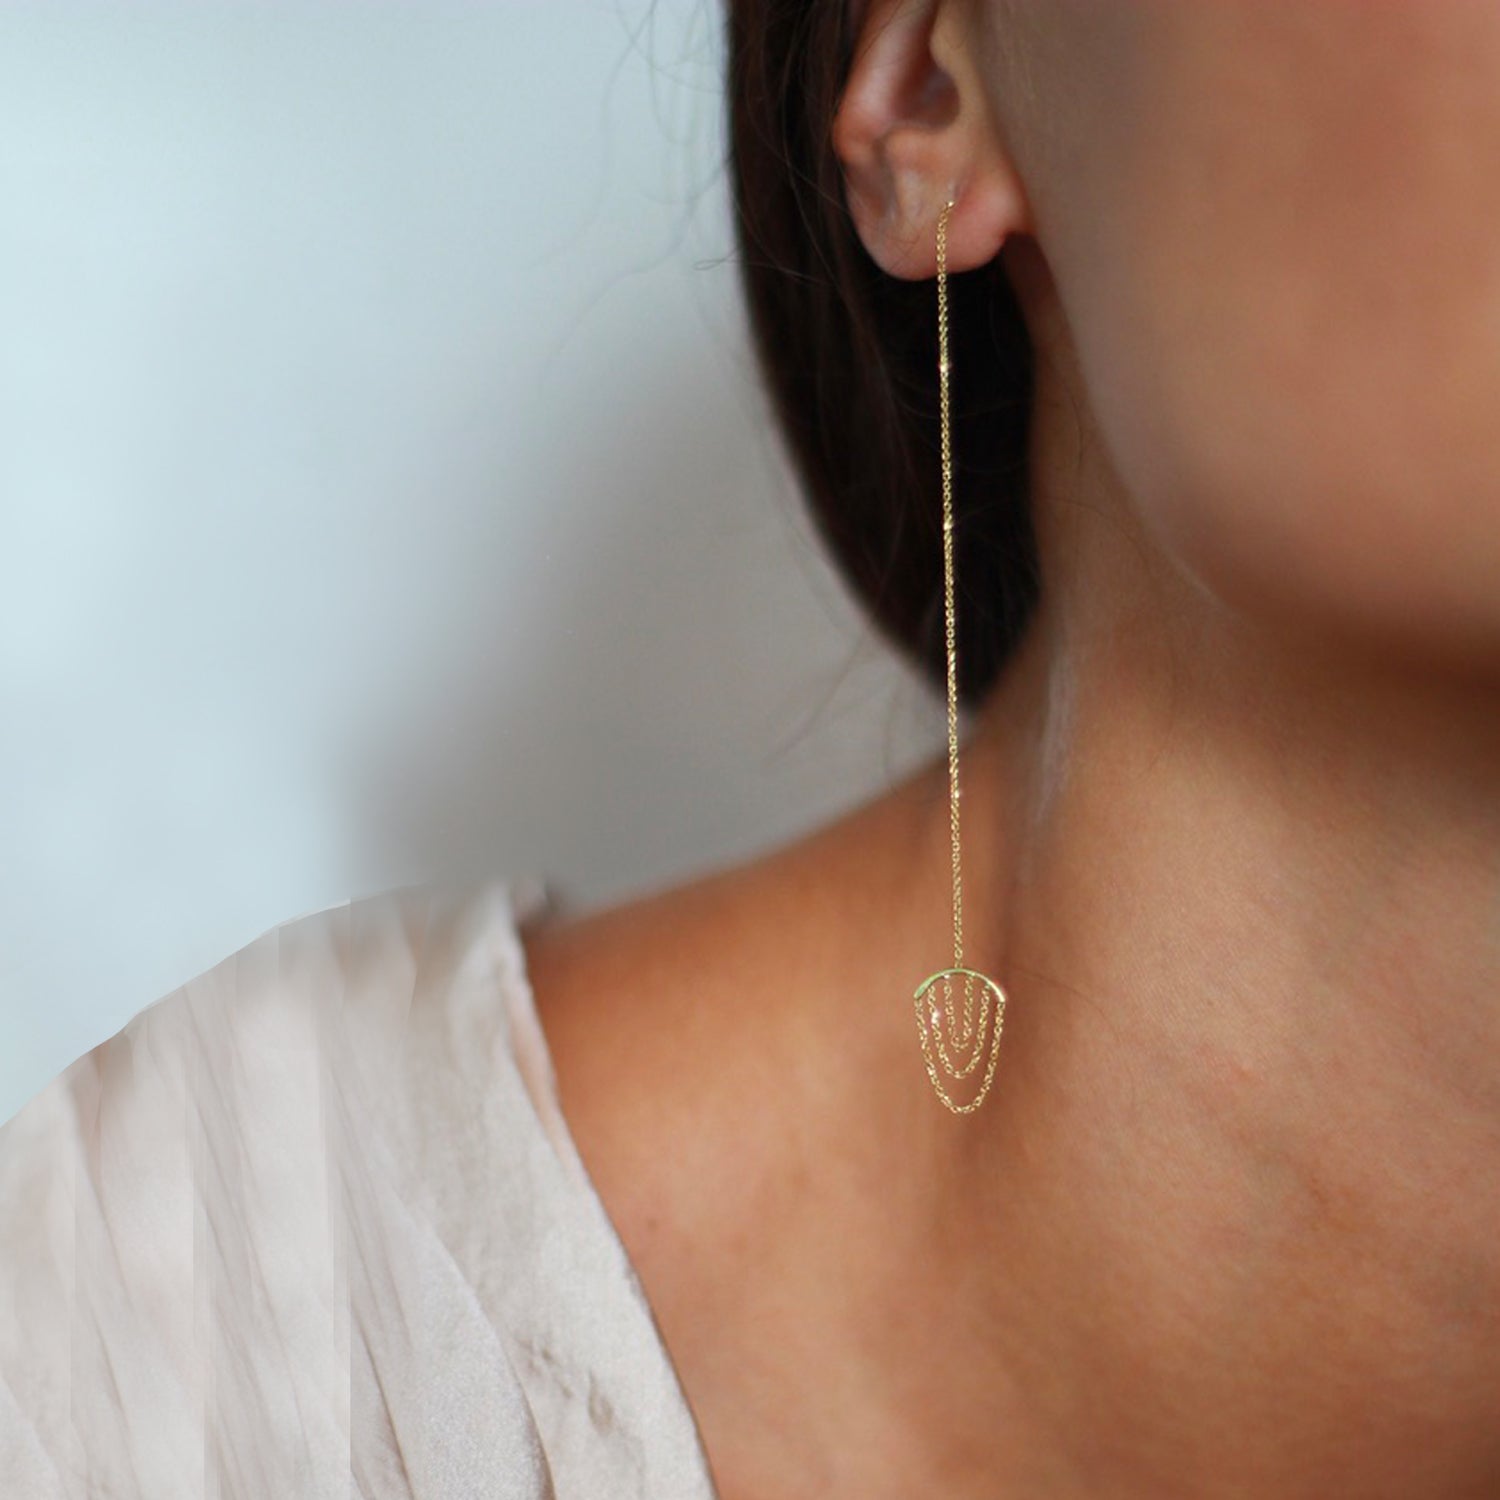 Sweet Pea 18ct yellow gold Nouveau Now thread through earrings with looped chains on model.